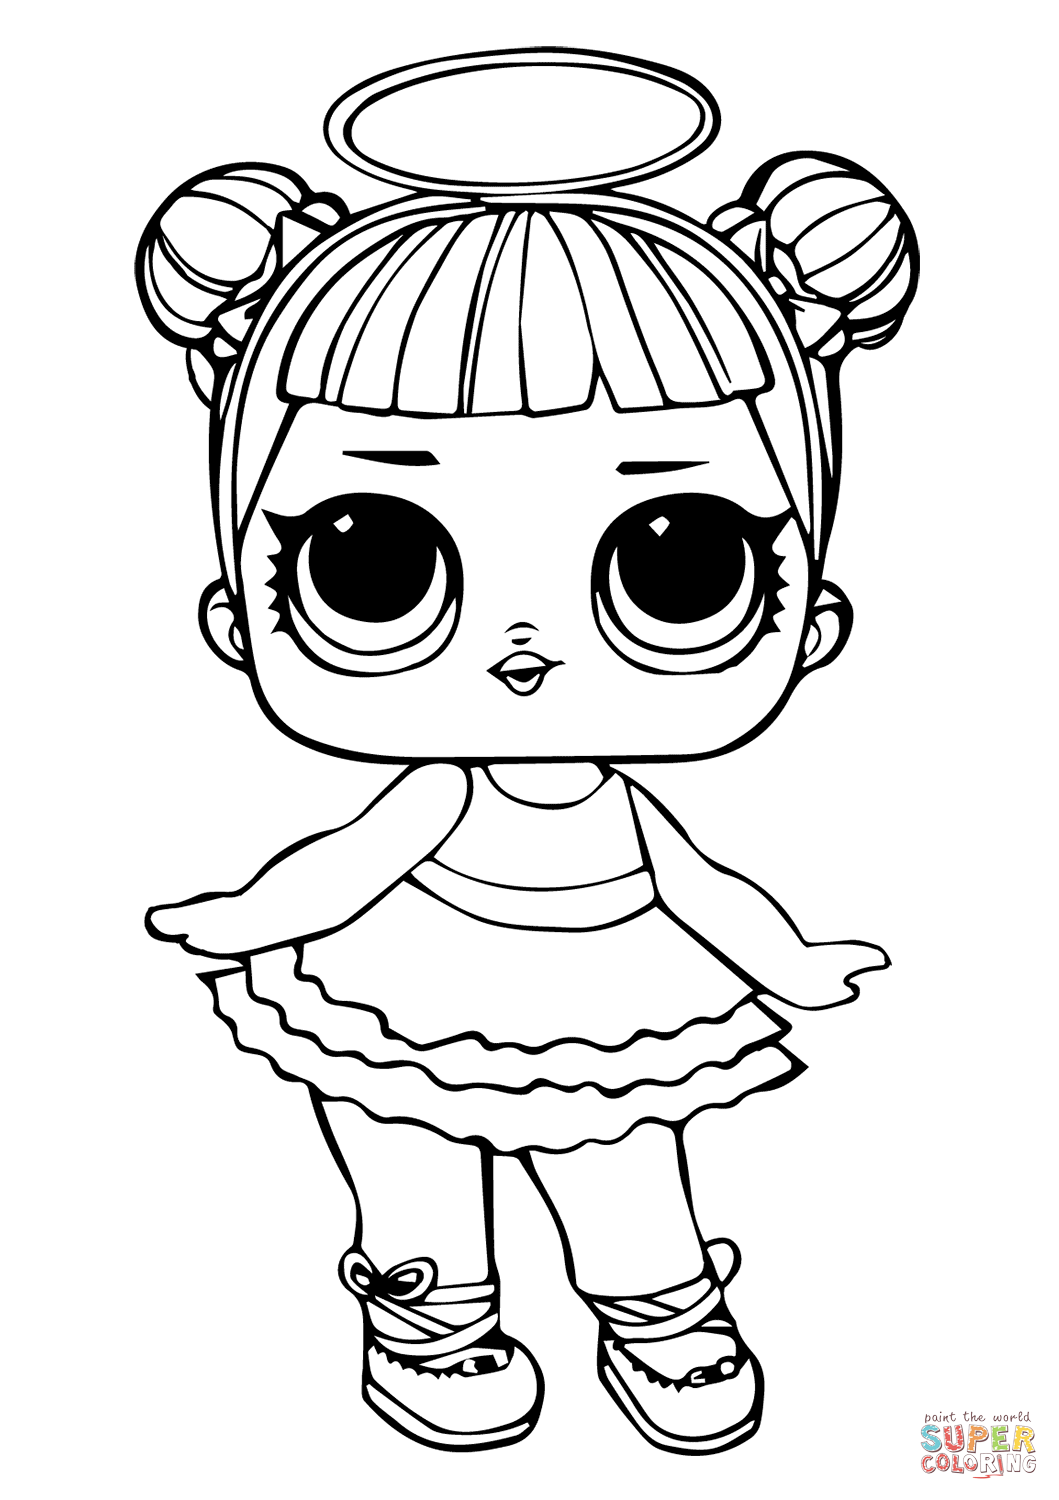 Coloring Pages : Lol Doll Sugar Coloring Page Free Printable ...